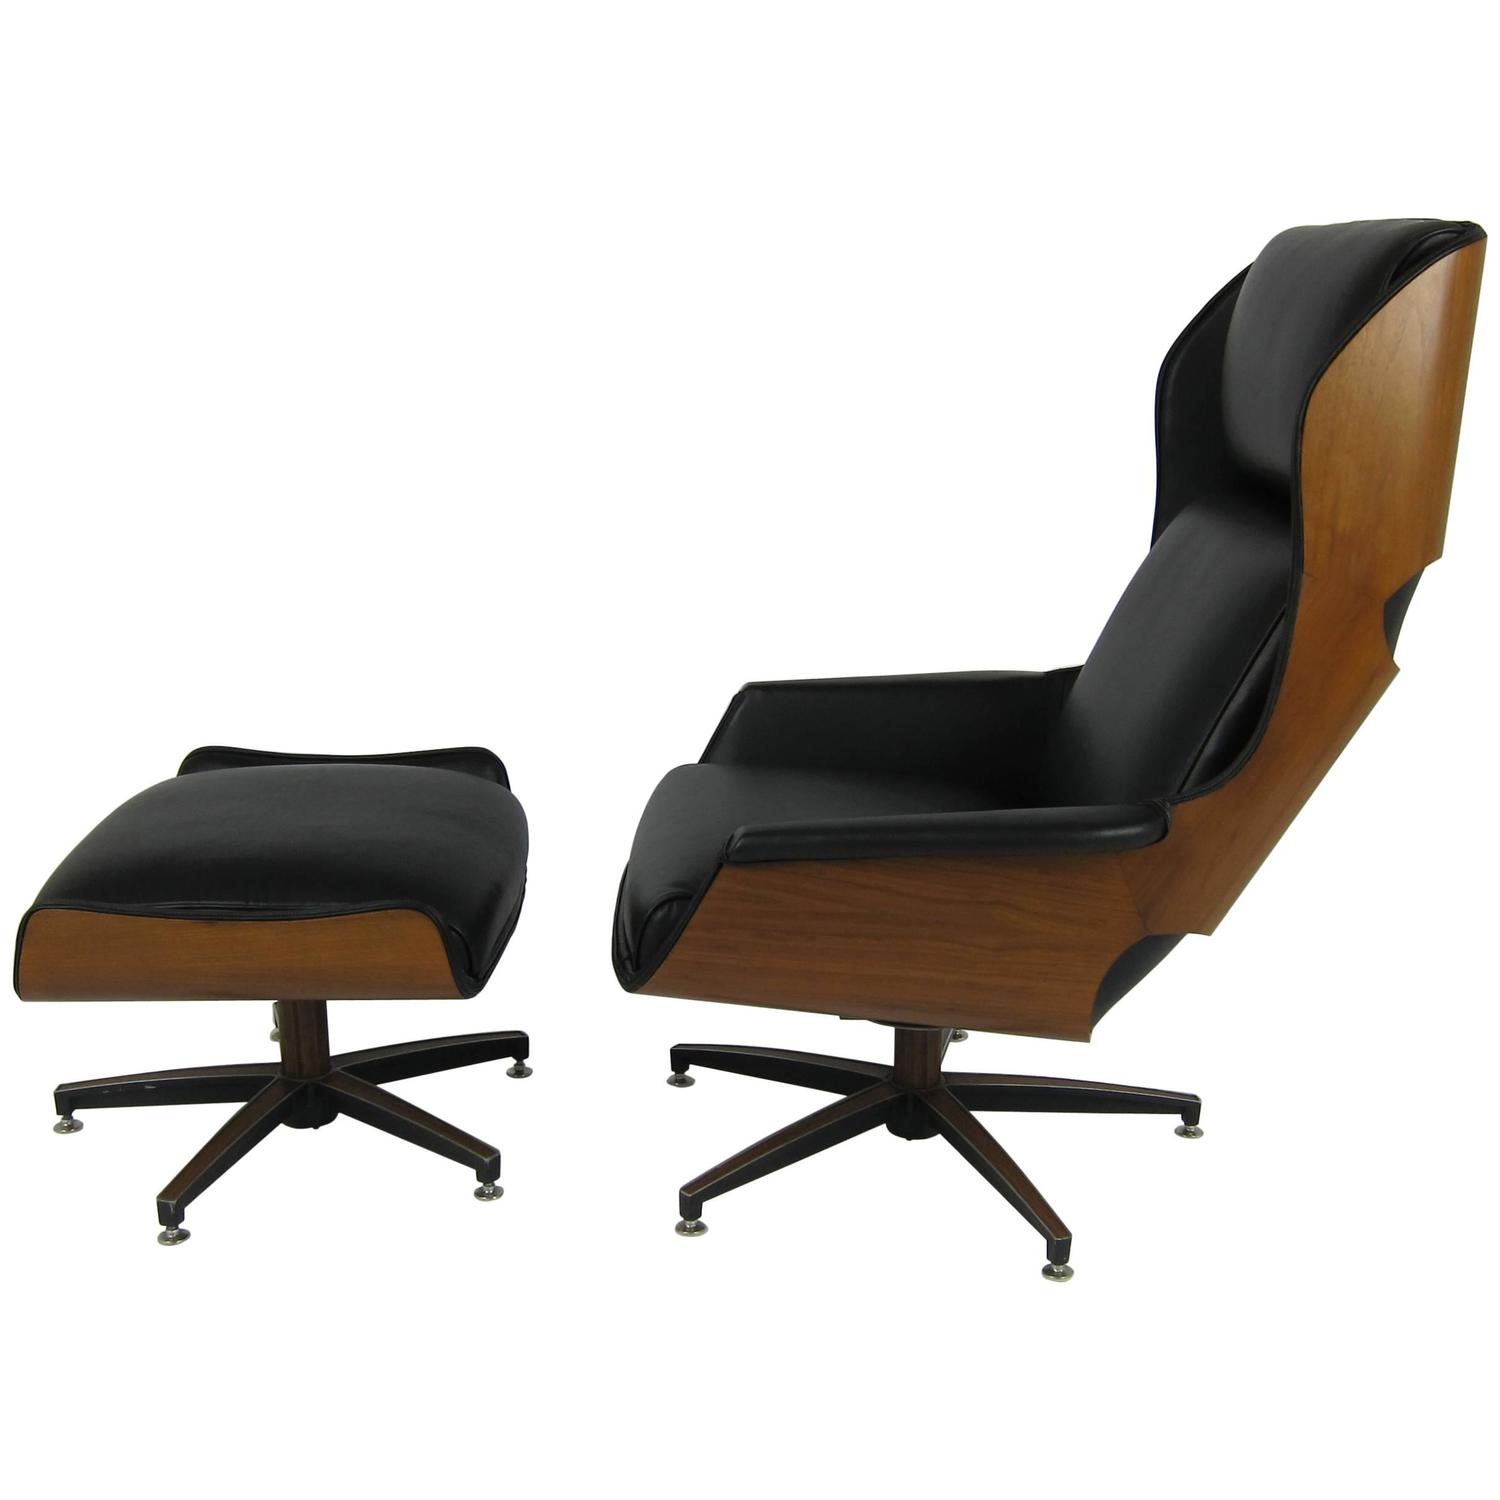 Rare Ultra Mod Walnut Plycraft "Mister" Lounge Chair and